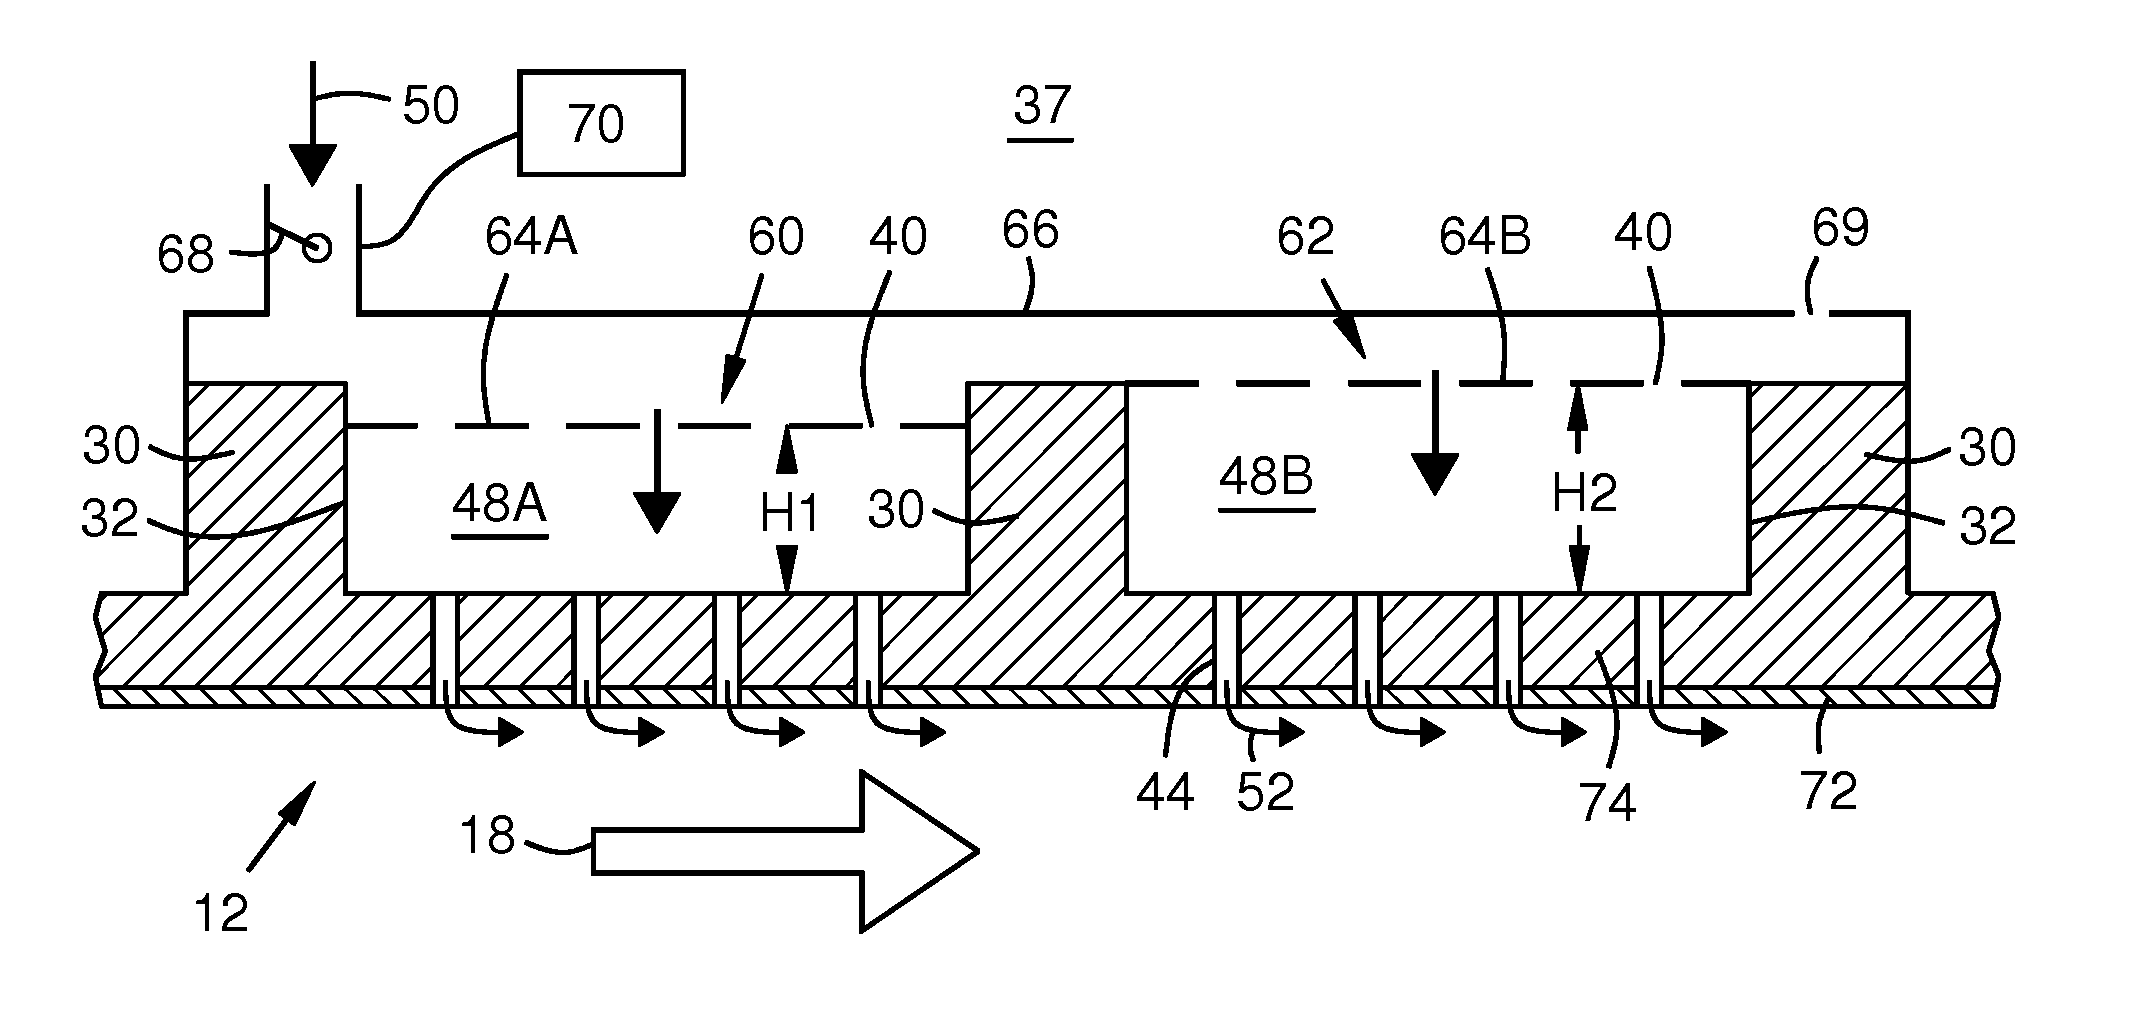 Apparatus for acoustic damping and operational control of damping, cooling, and emissions in a gas turbine engine